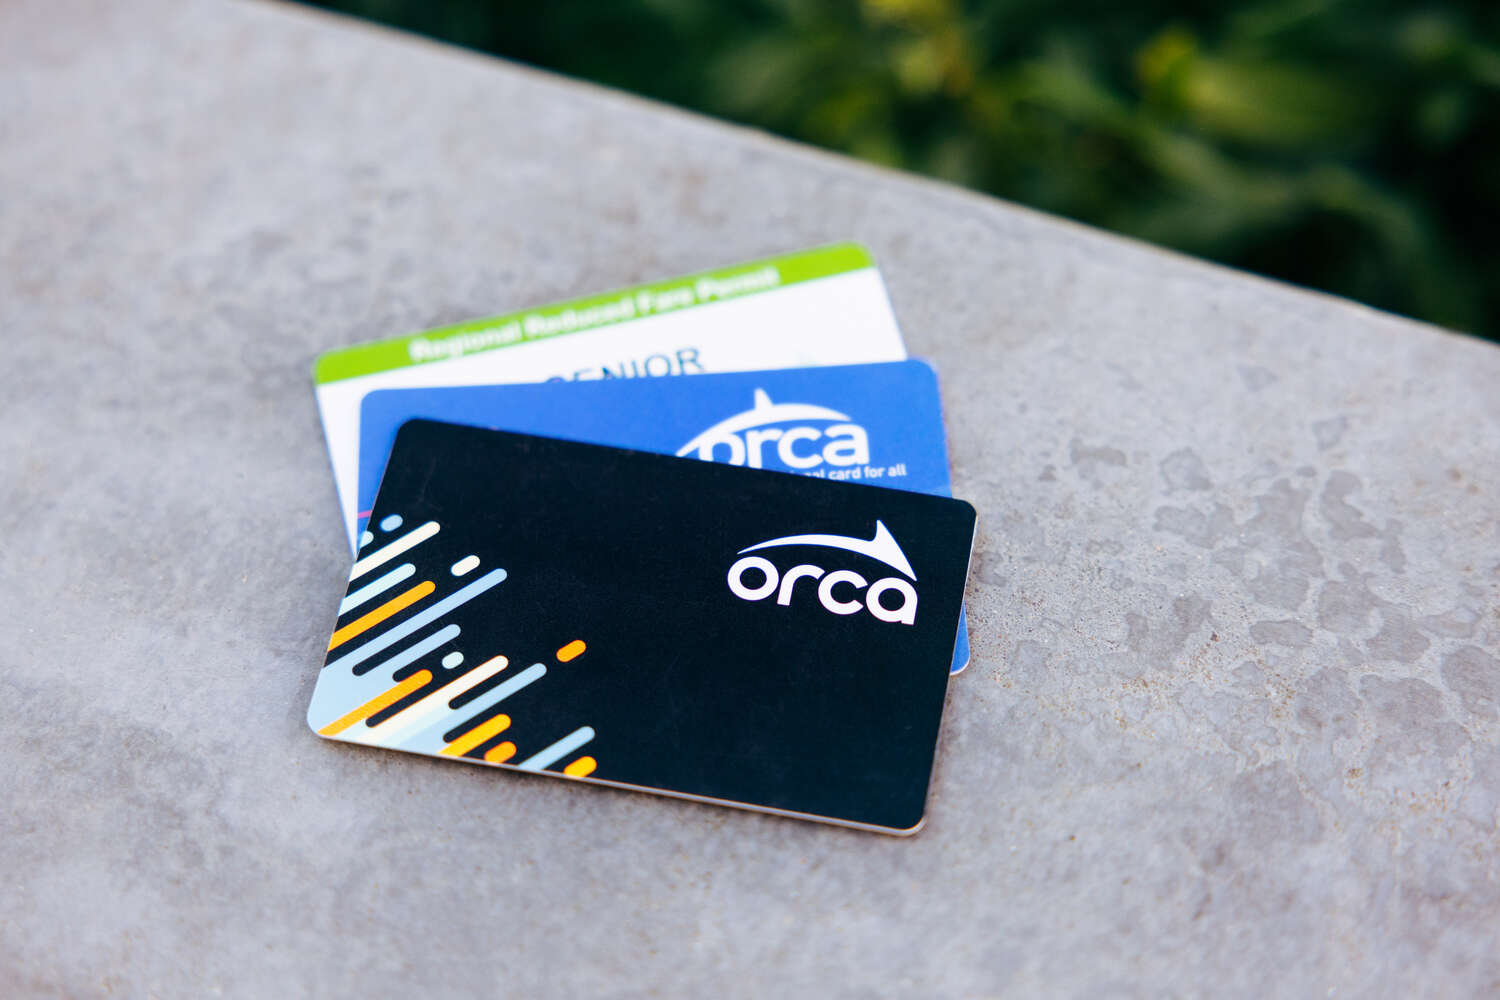 ORCA card being scanned on bus